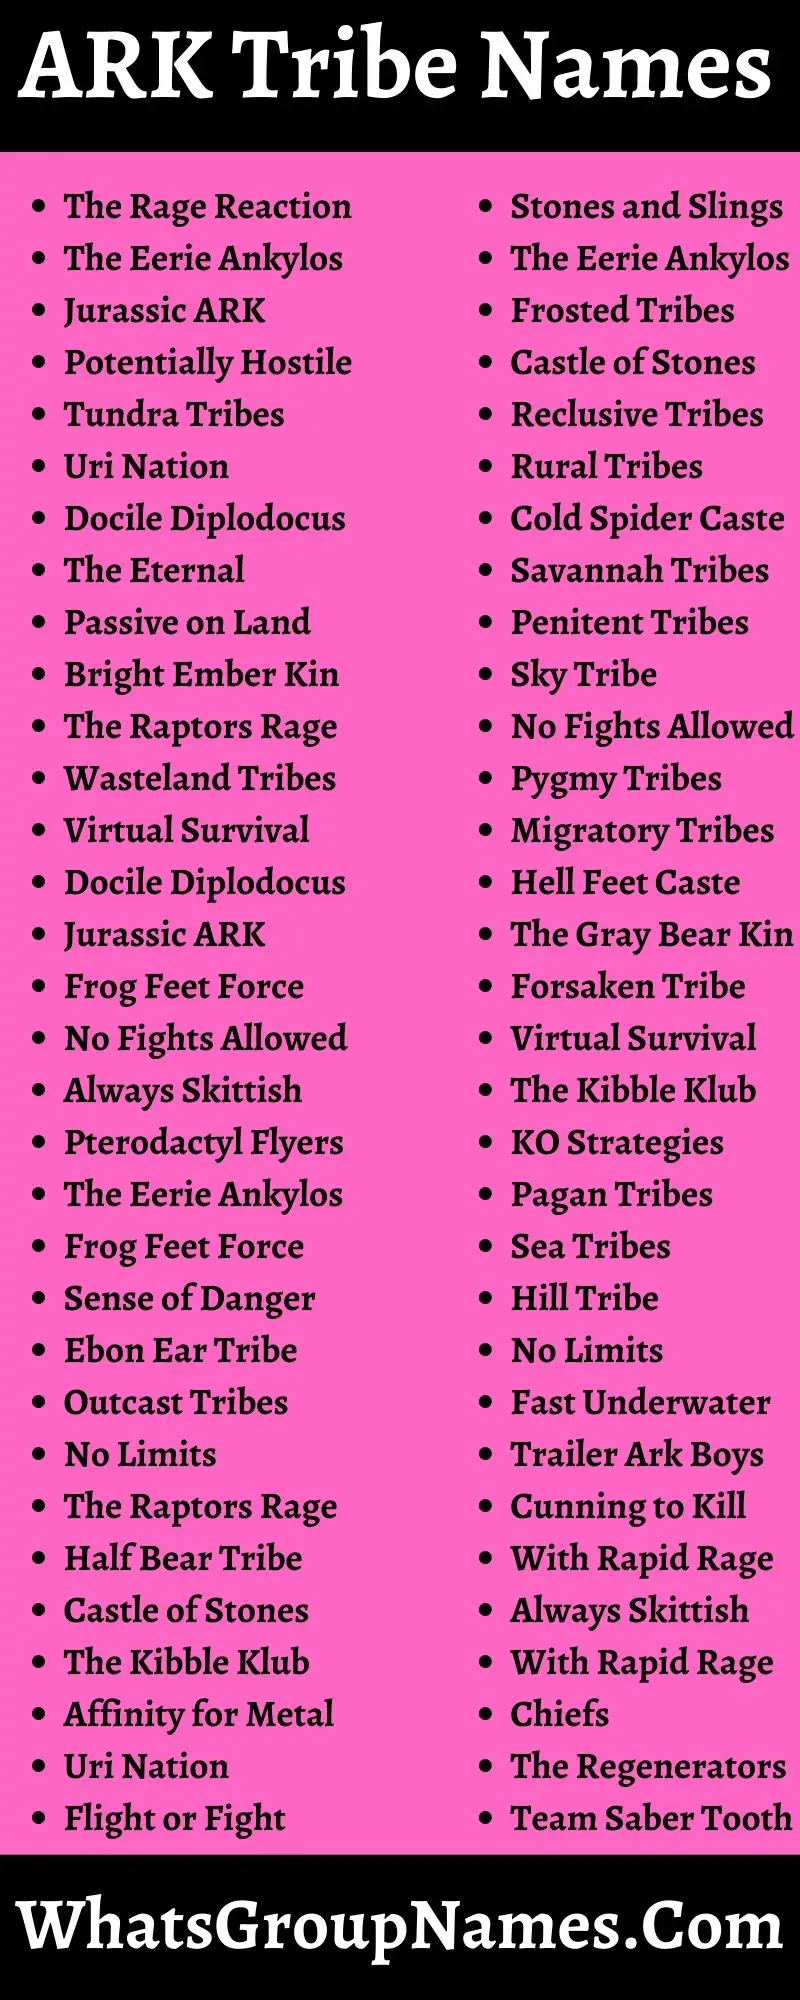 500 Tribe Names For ARK [2021] Cool, Good, Funny & Strong